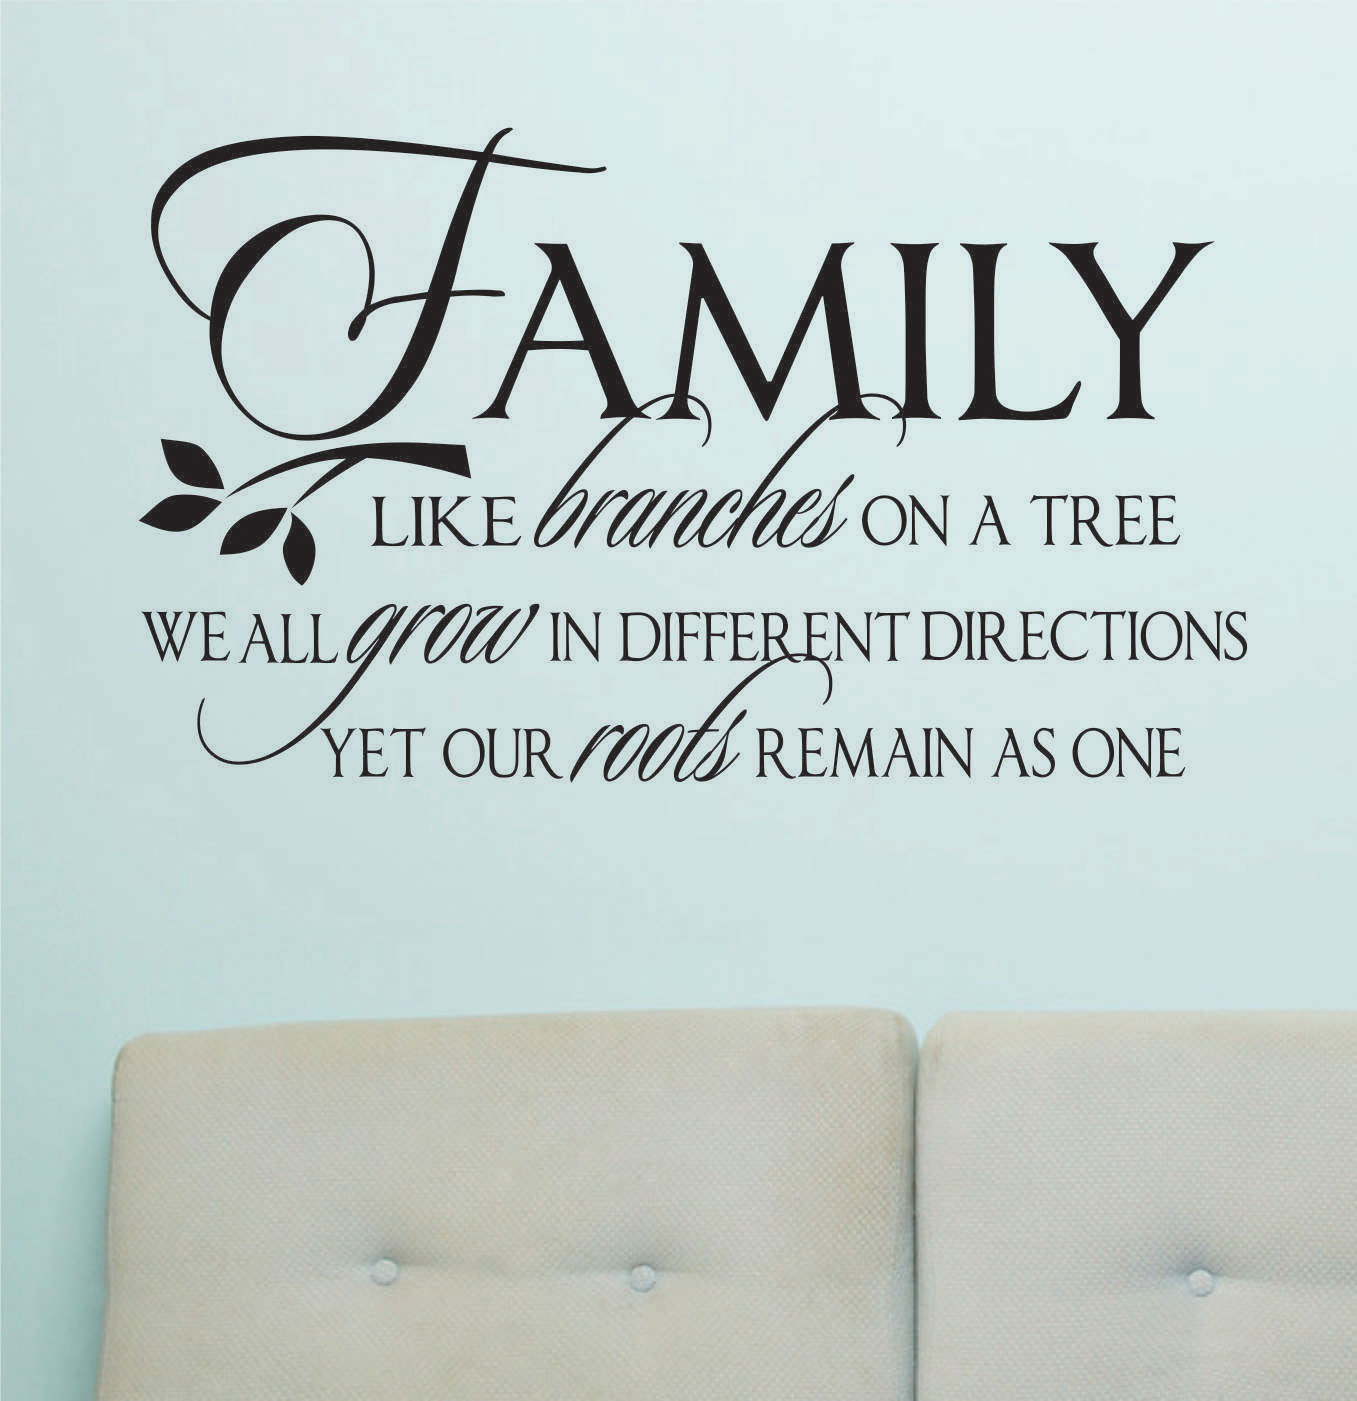 Quotes About Family Trees. QuotesGram